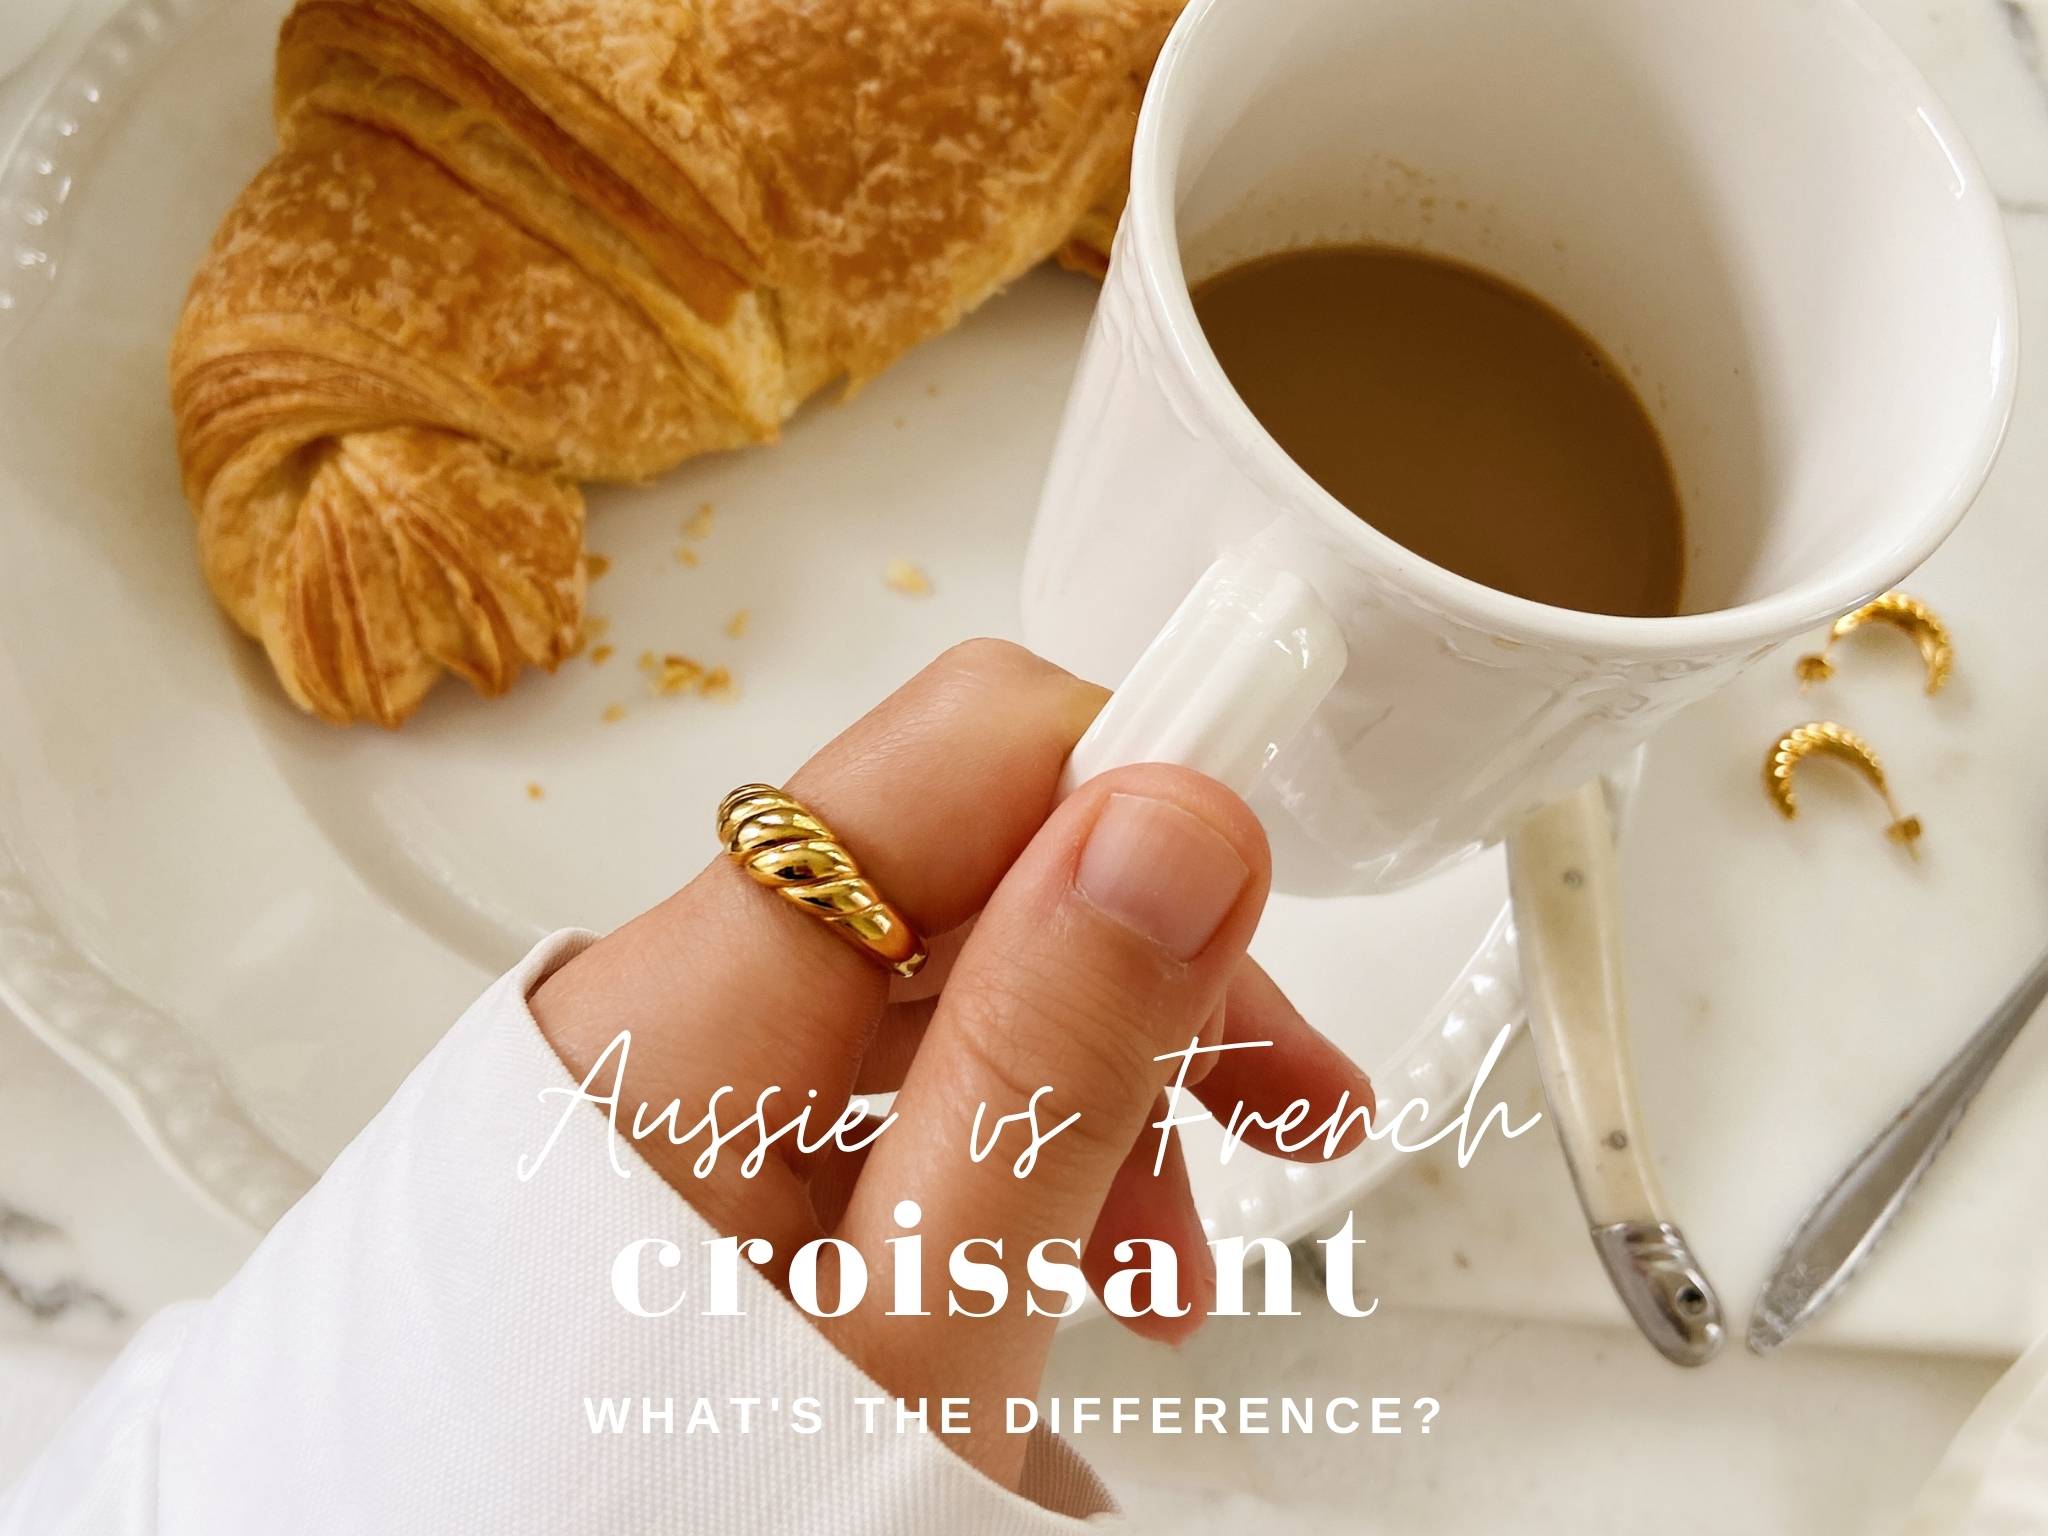 Aussie vs French Croissant - What's the difference